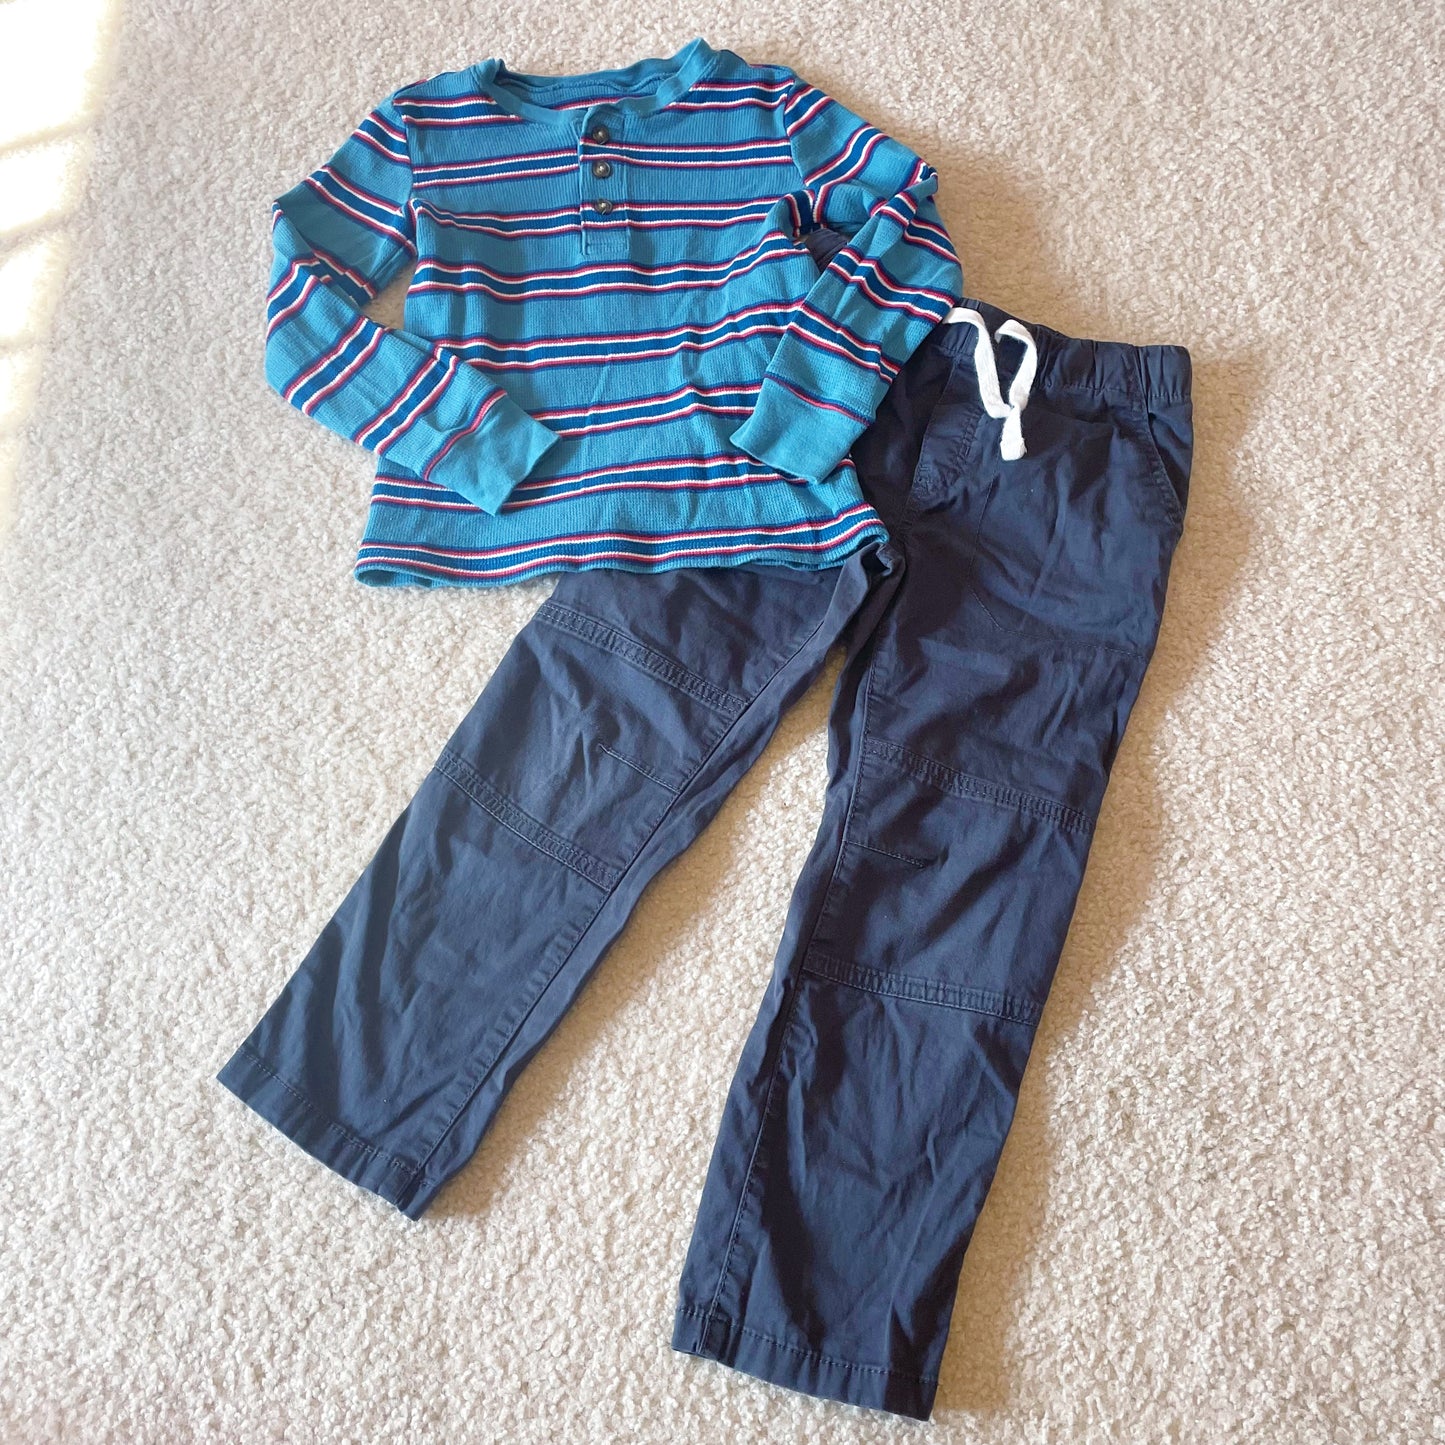 Boys Size 6 Cat & Jack / Carter's Thermal Shirt and Gray Pants Outfit